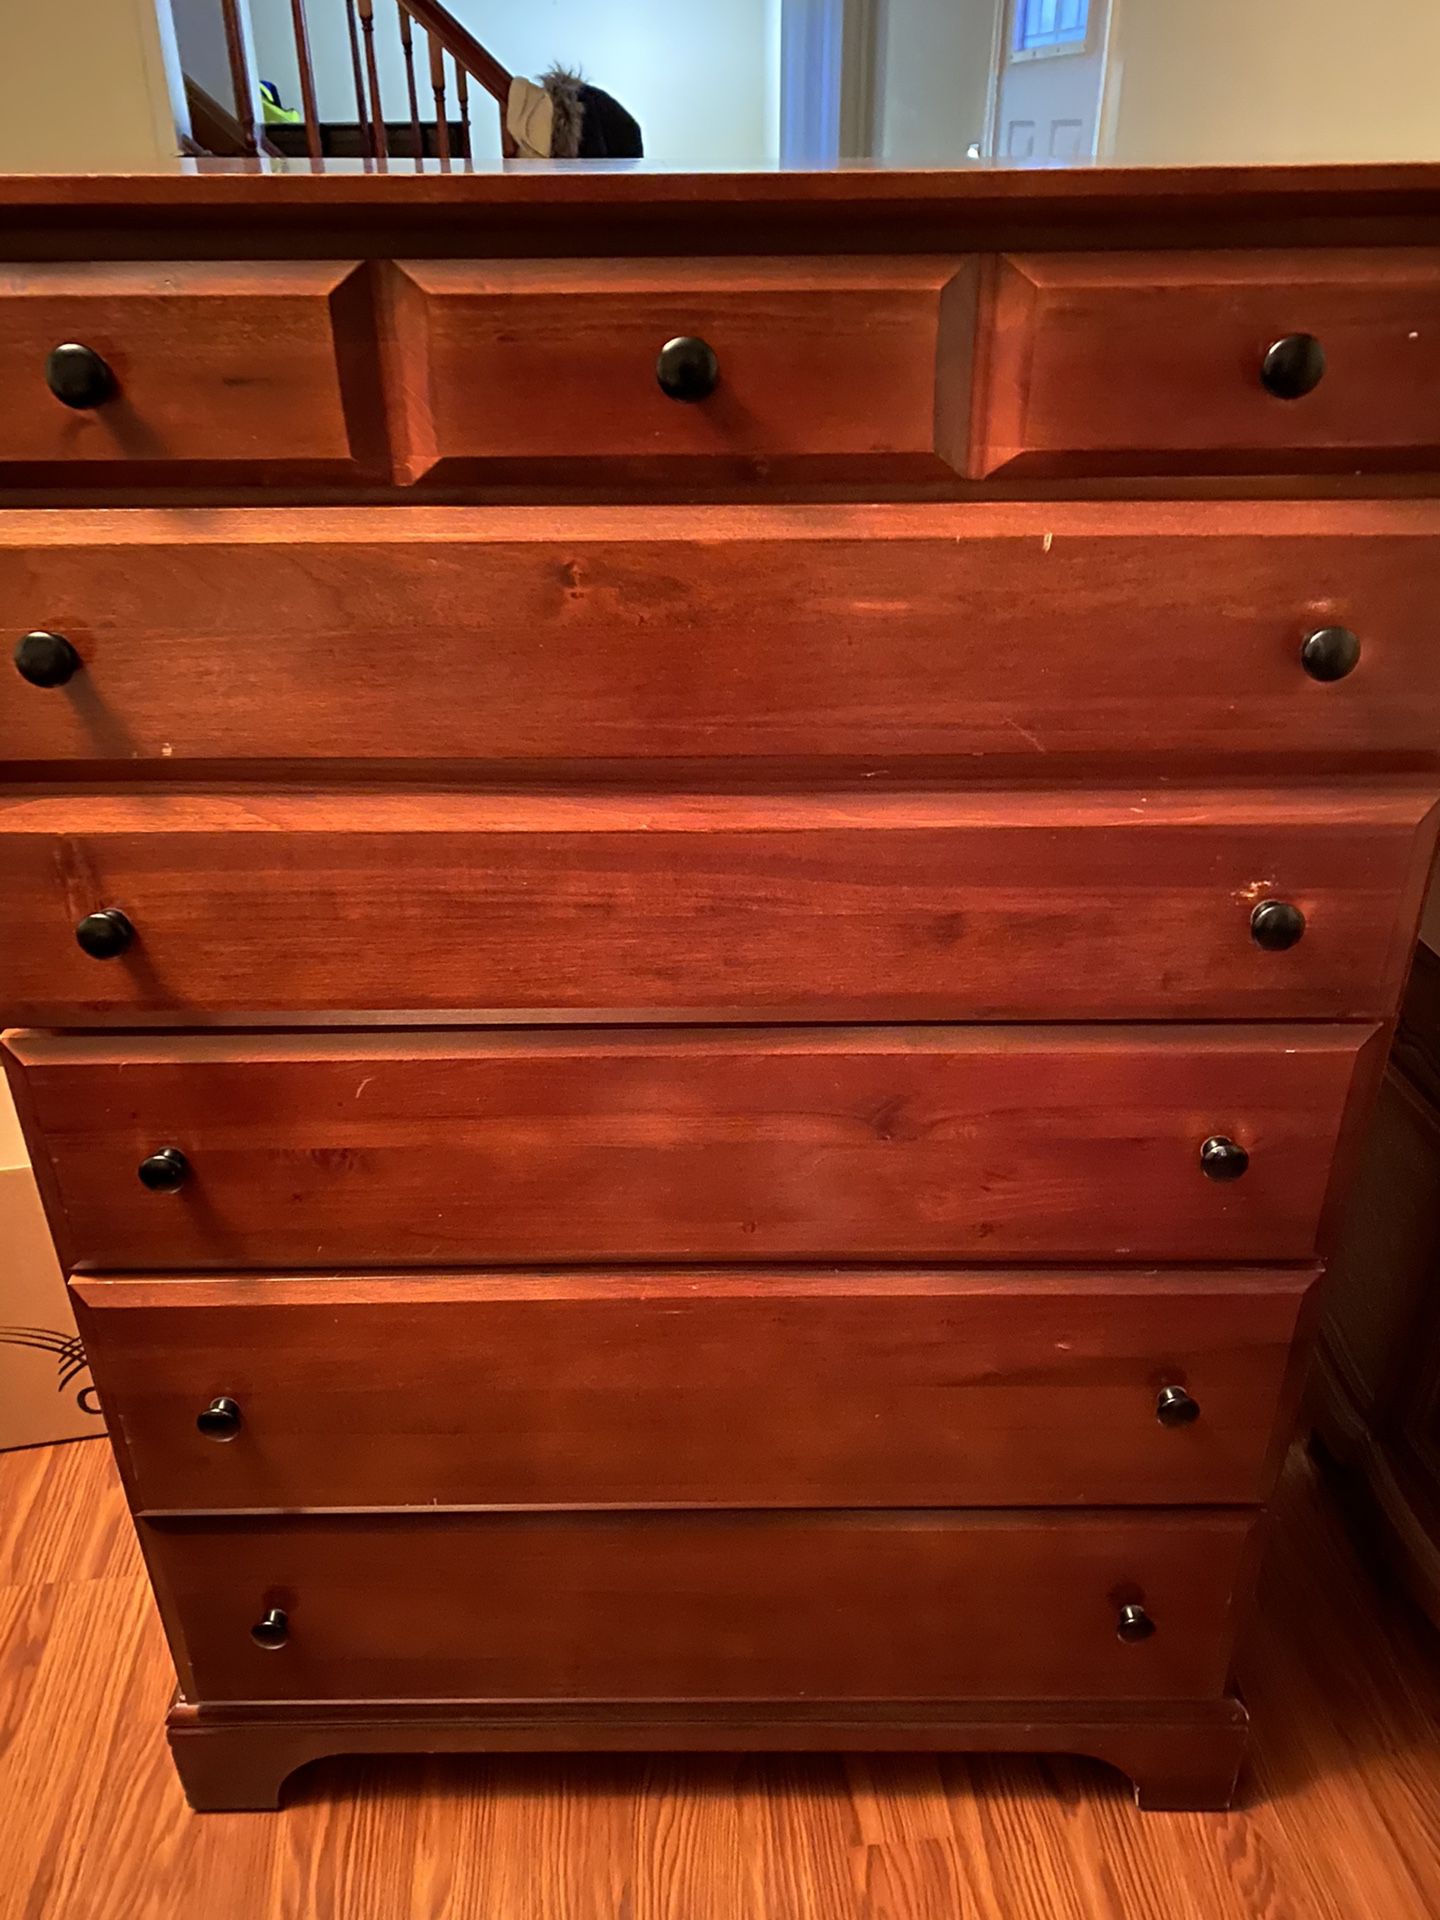 Dresser and two night stands